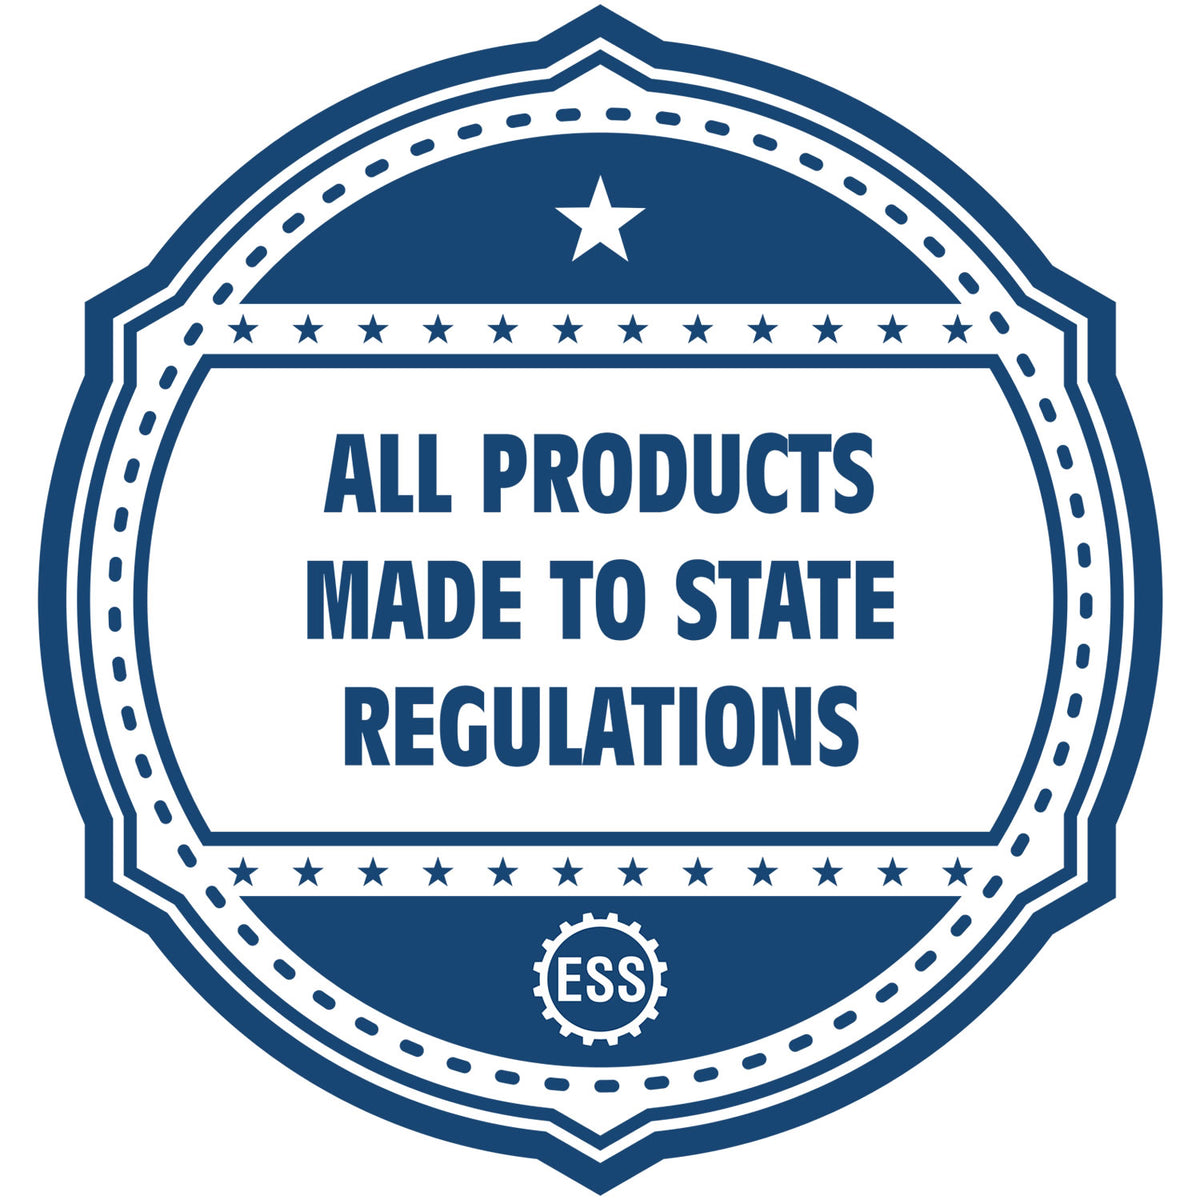 An icon or badge element for the Super Slim Colorado Notary Public Stamp showing that this product is made in compliance with state regulations.